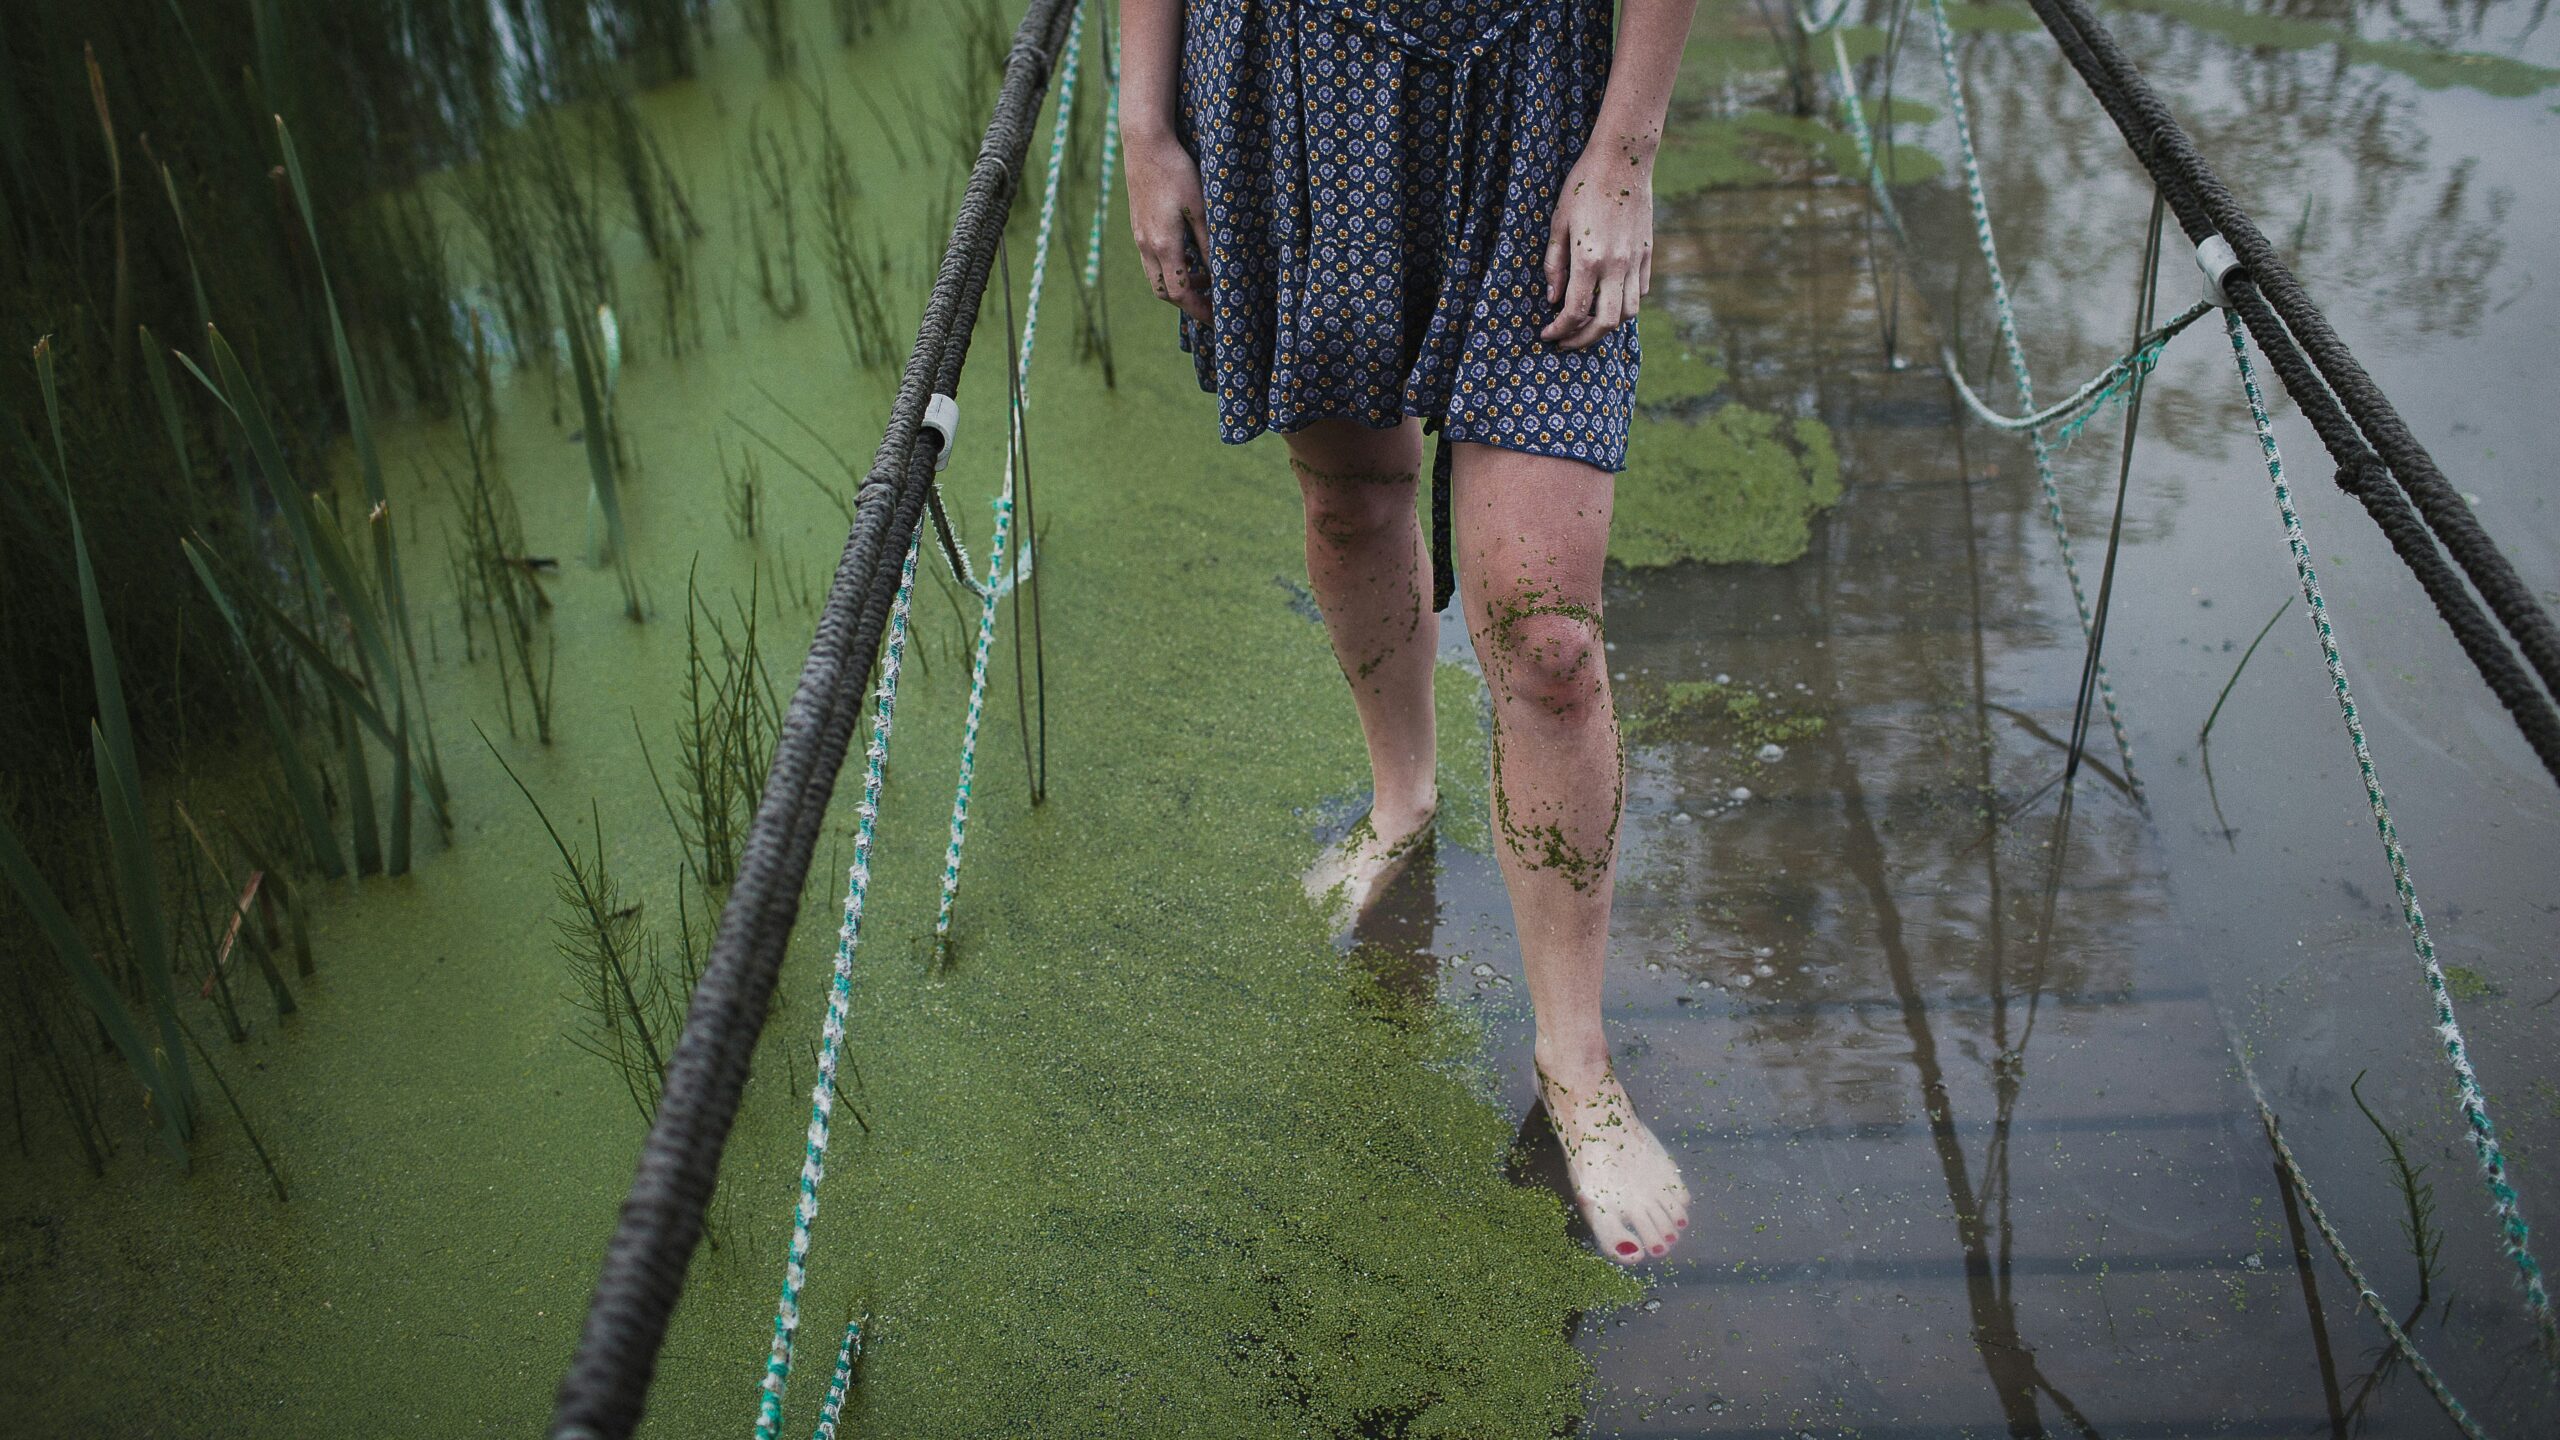 When Harmful Algal Blooms Result in Public Health Disasters